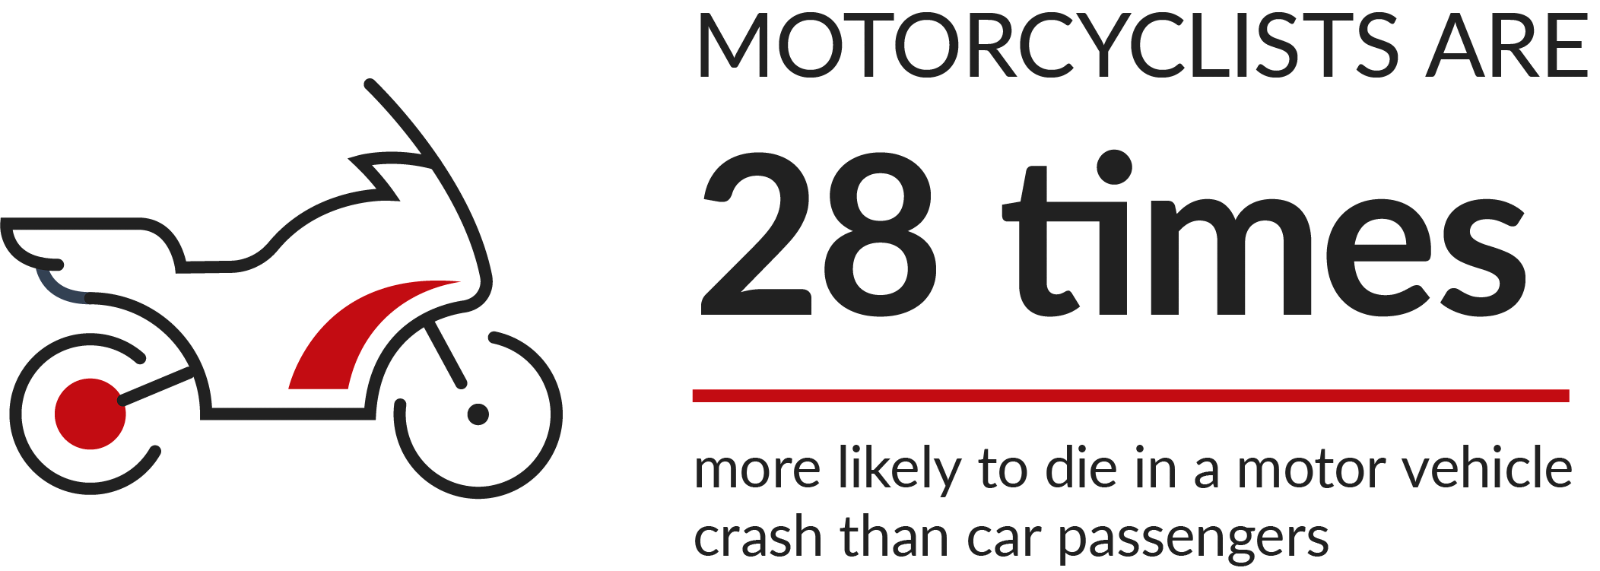 motorcycle-stats-1